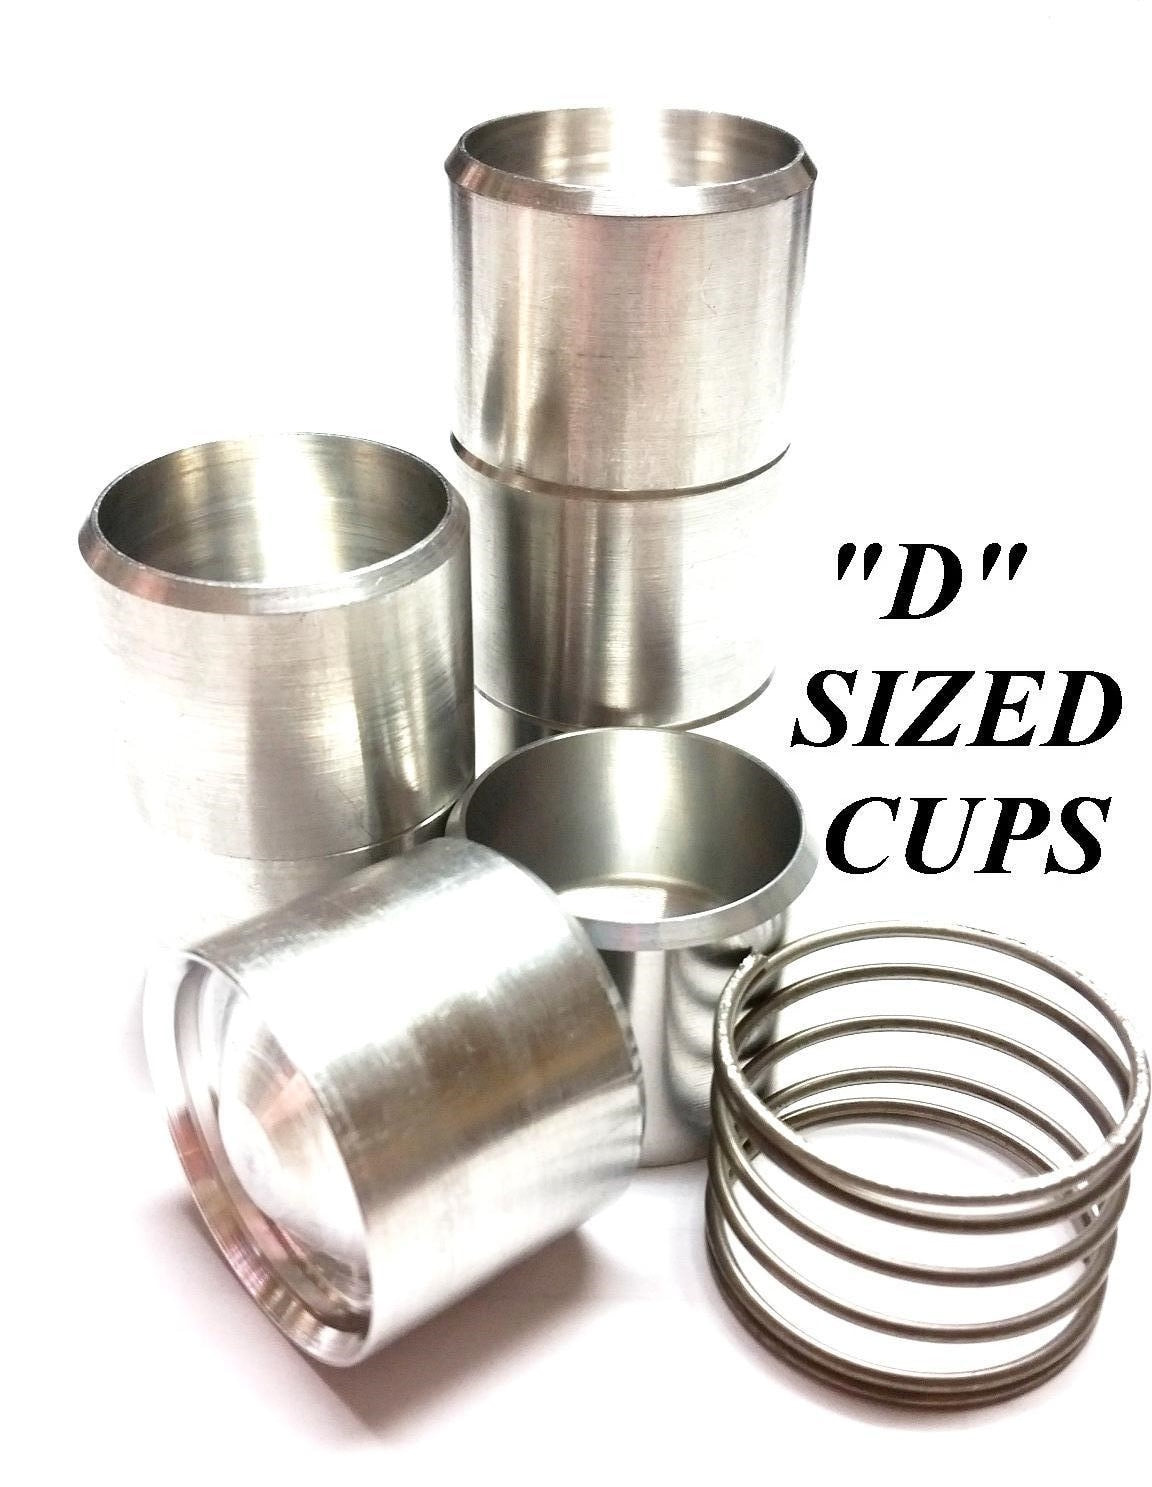 Maglite D Sized Cup Inserts for Concealment or Discrete Dry Storage